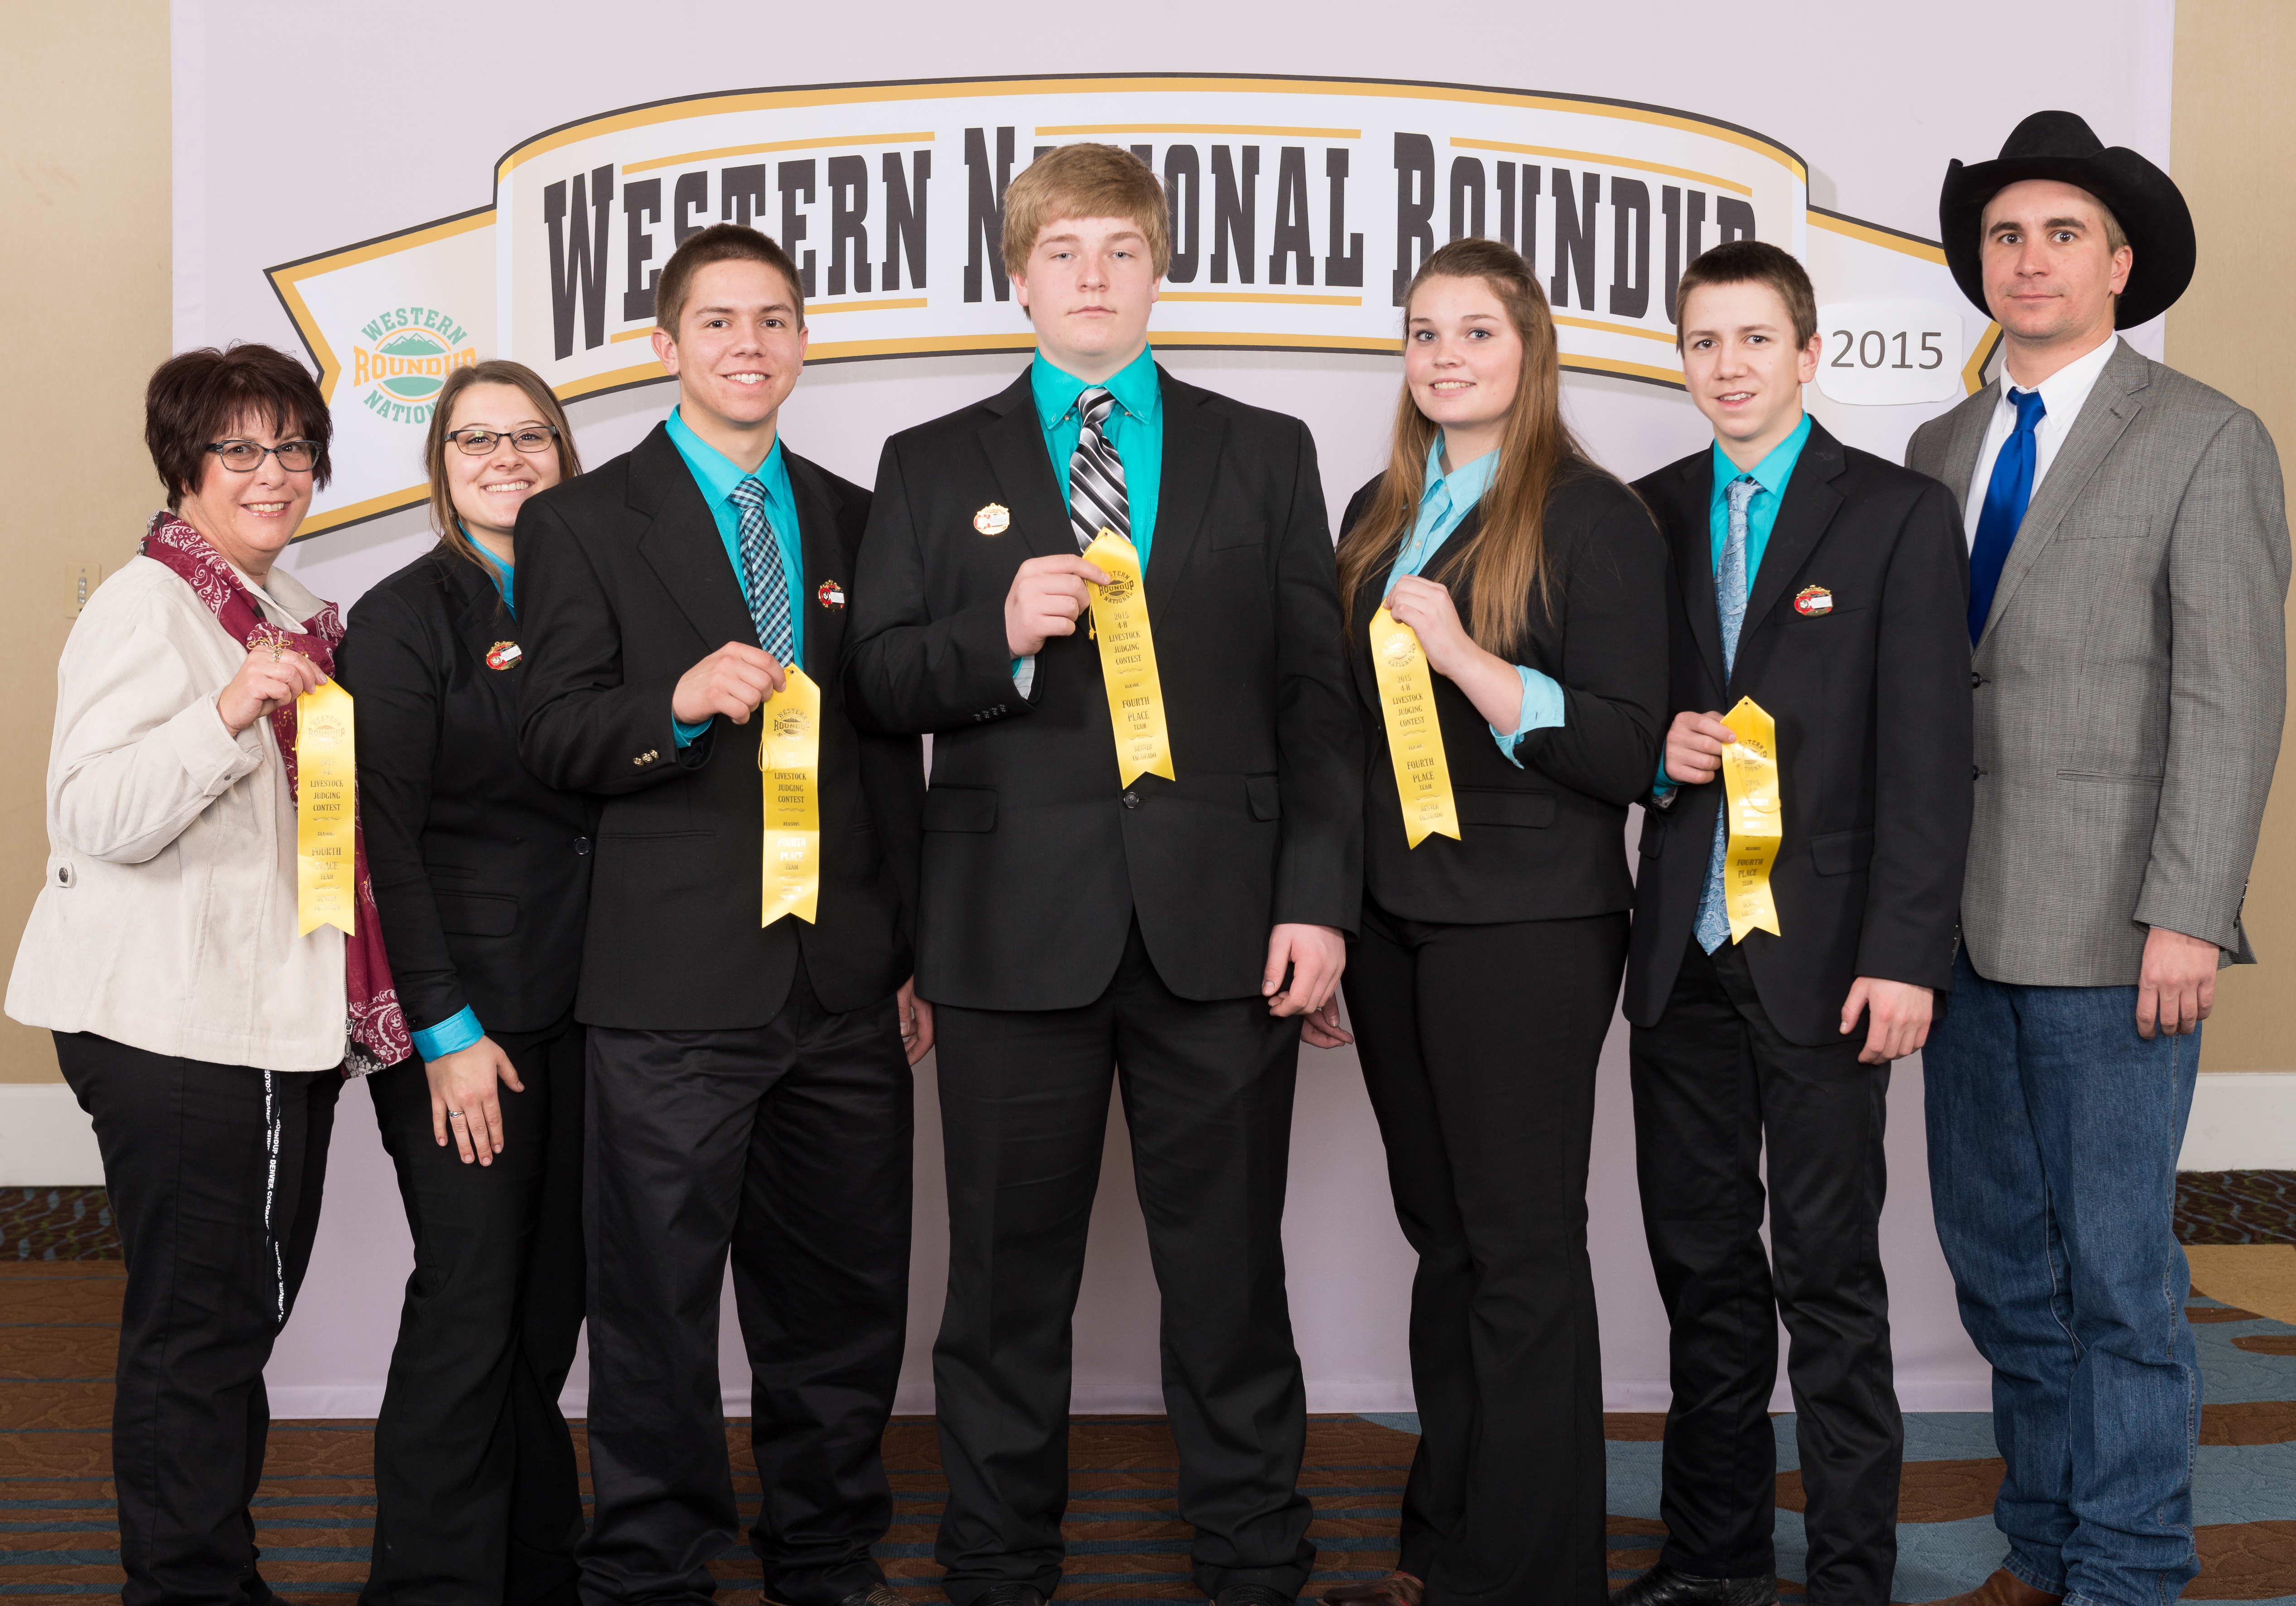 The Morton County livestock judging team places 11th overall at the Western National Roundup in Denver, Colo. Pictured are (from left): Jackie Buckley (coach), team members Kelsie Schaff, Jameson Ellingson, Conner Kaelberer, Sara Jochim and Stetson Ellingson, and Luke Keller (coach). (Photo courtesy of Western National Roundup)